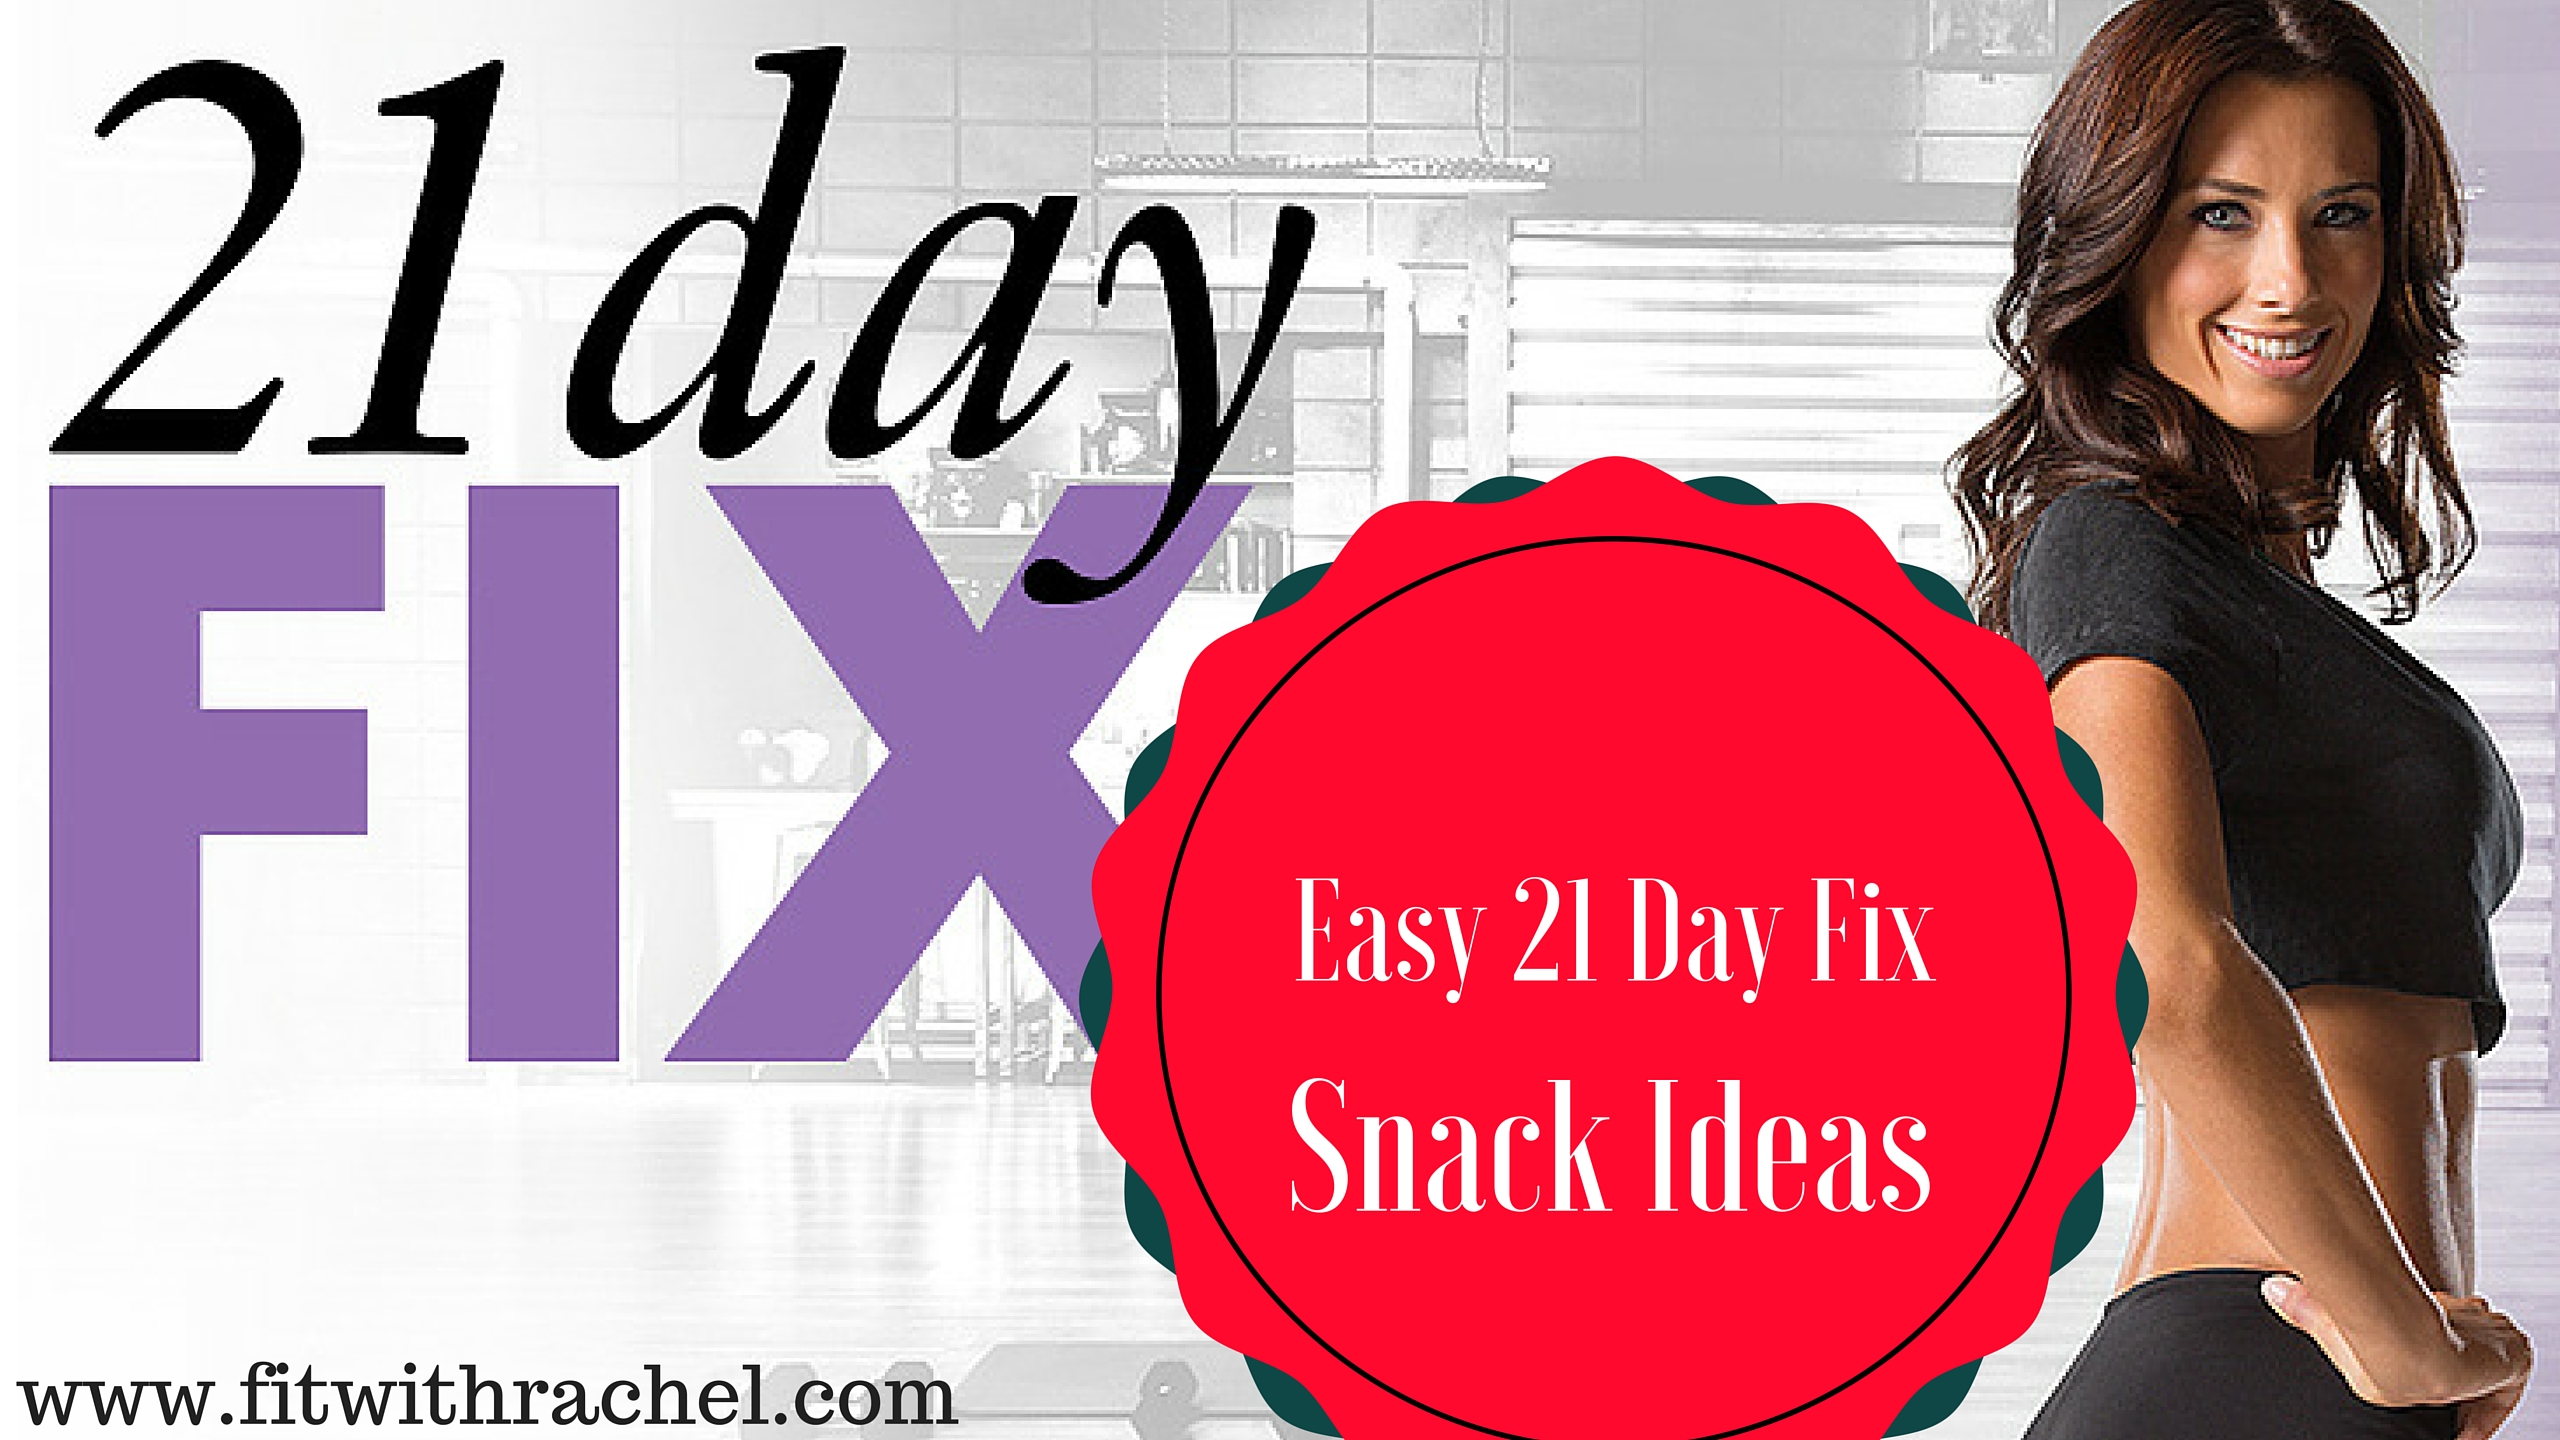 Easy 21 Day Fix Snack Ideas | Fit with Rachel